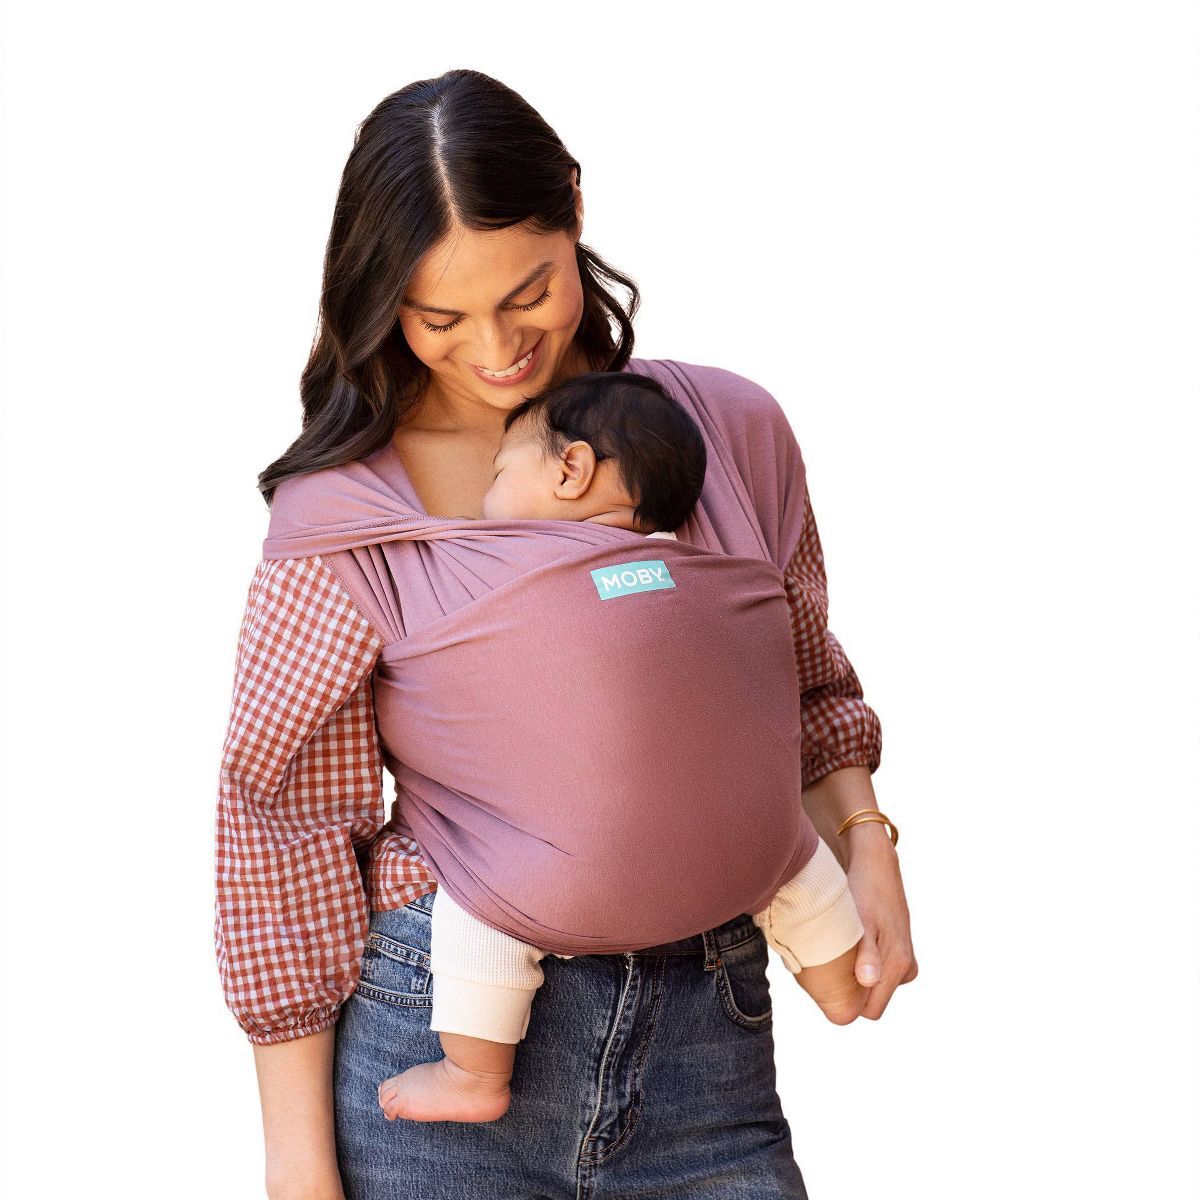 Moby Evolution Wrap Baby Carrier | Target